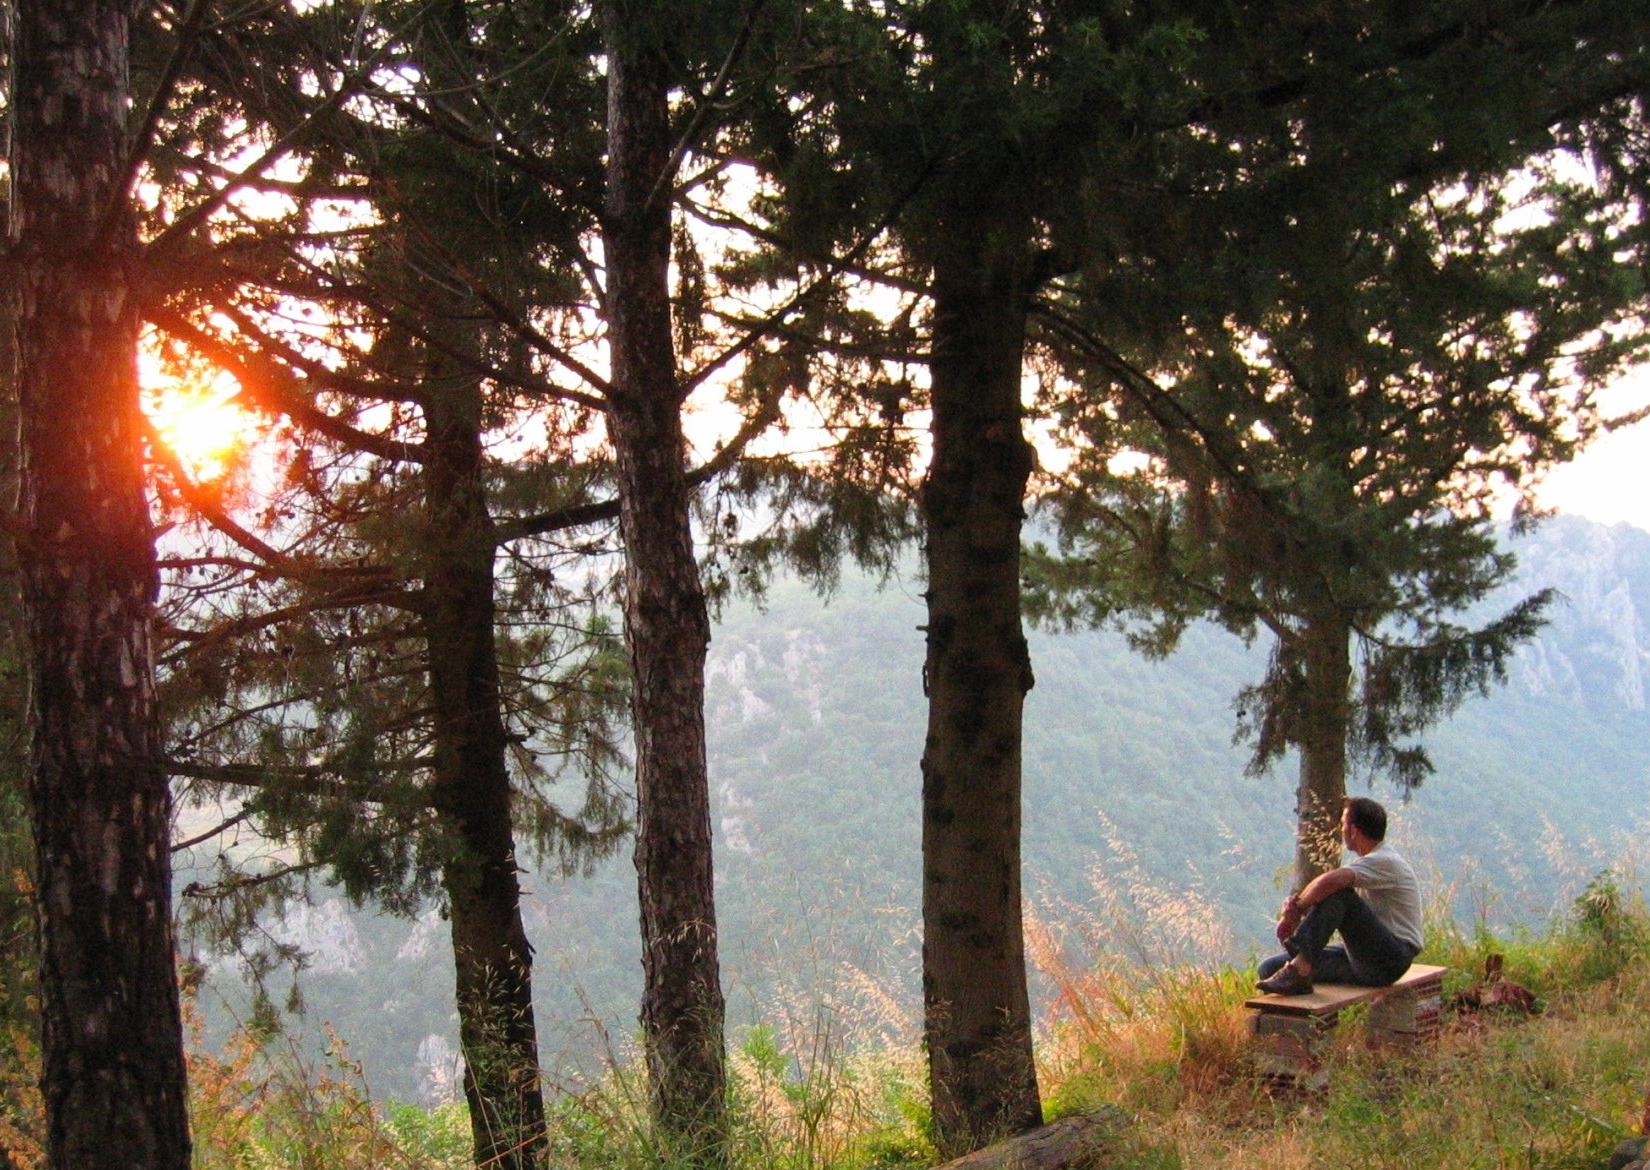 Man meditating in the forest - relationship spaces